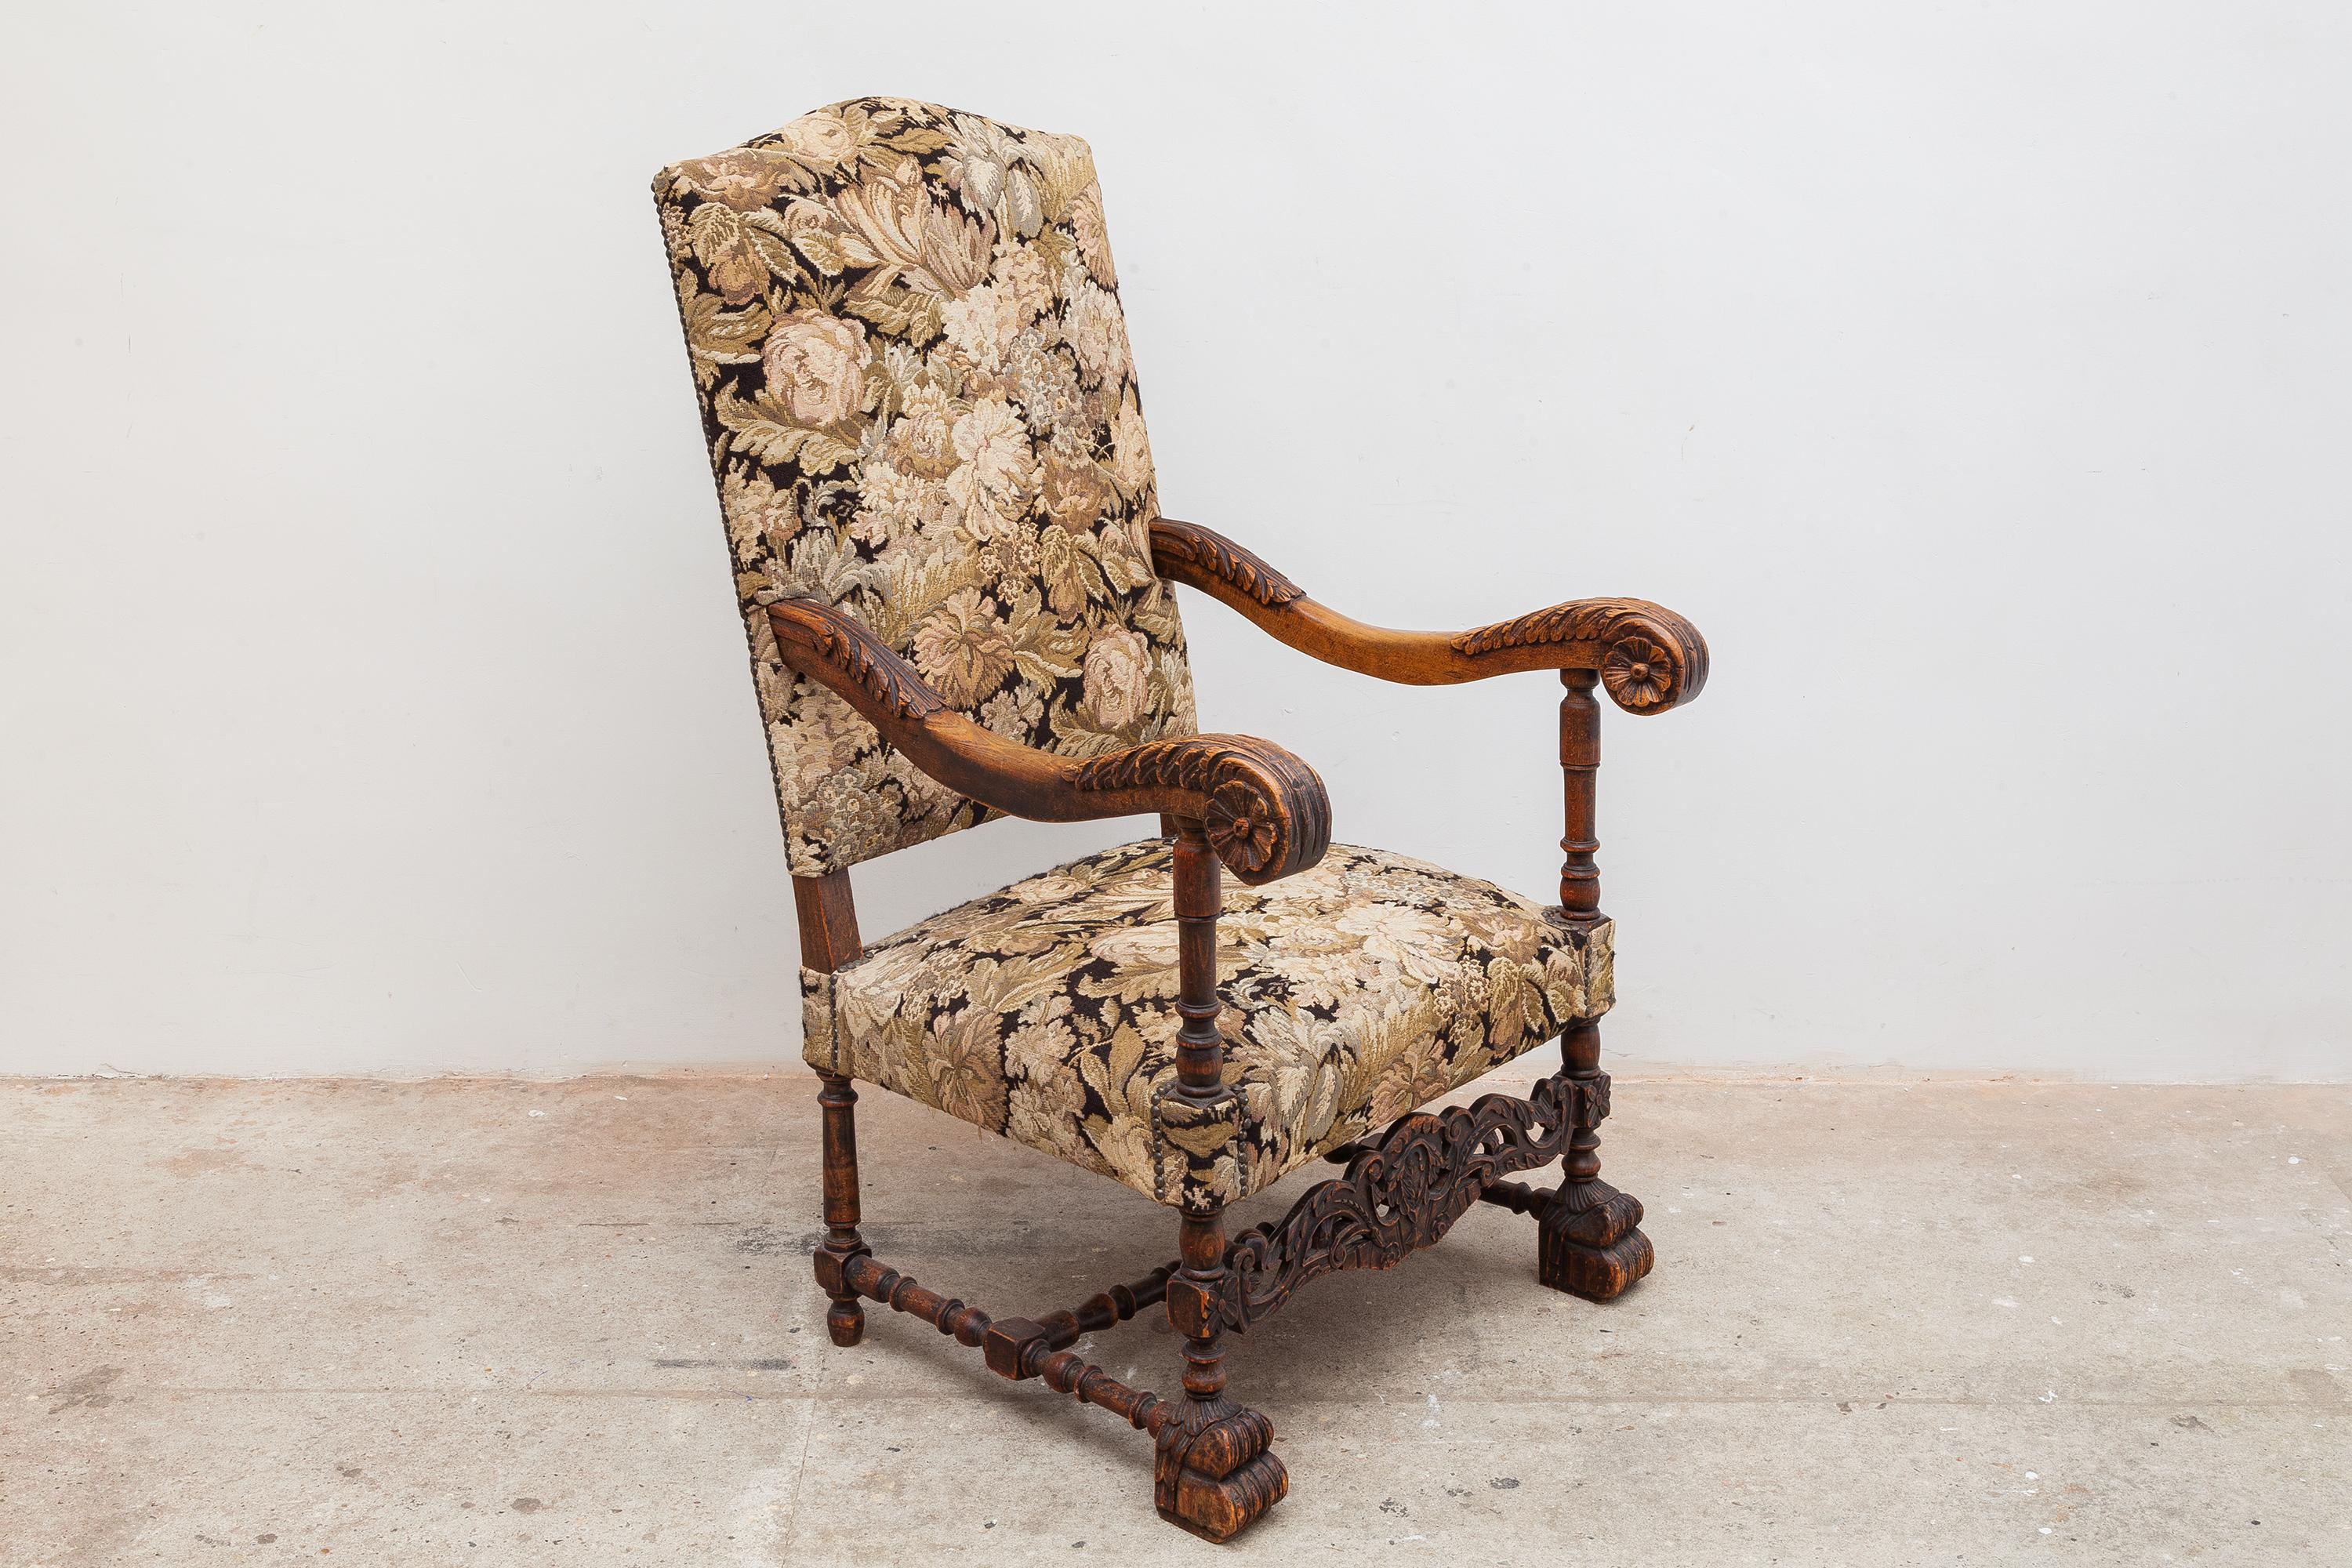 French antique throne high back parlor chair with original floral upholstery and tacks. Carved wooden frame with scrolling floral motif dated 1870. Dimensions: 68W x 118H x 72D cm Seat: 42cm high.